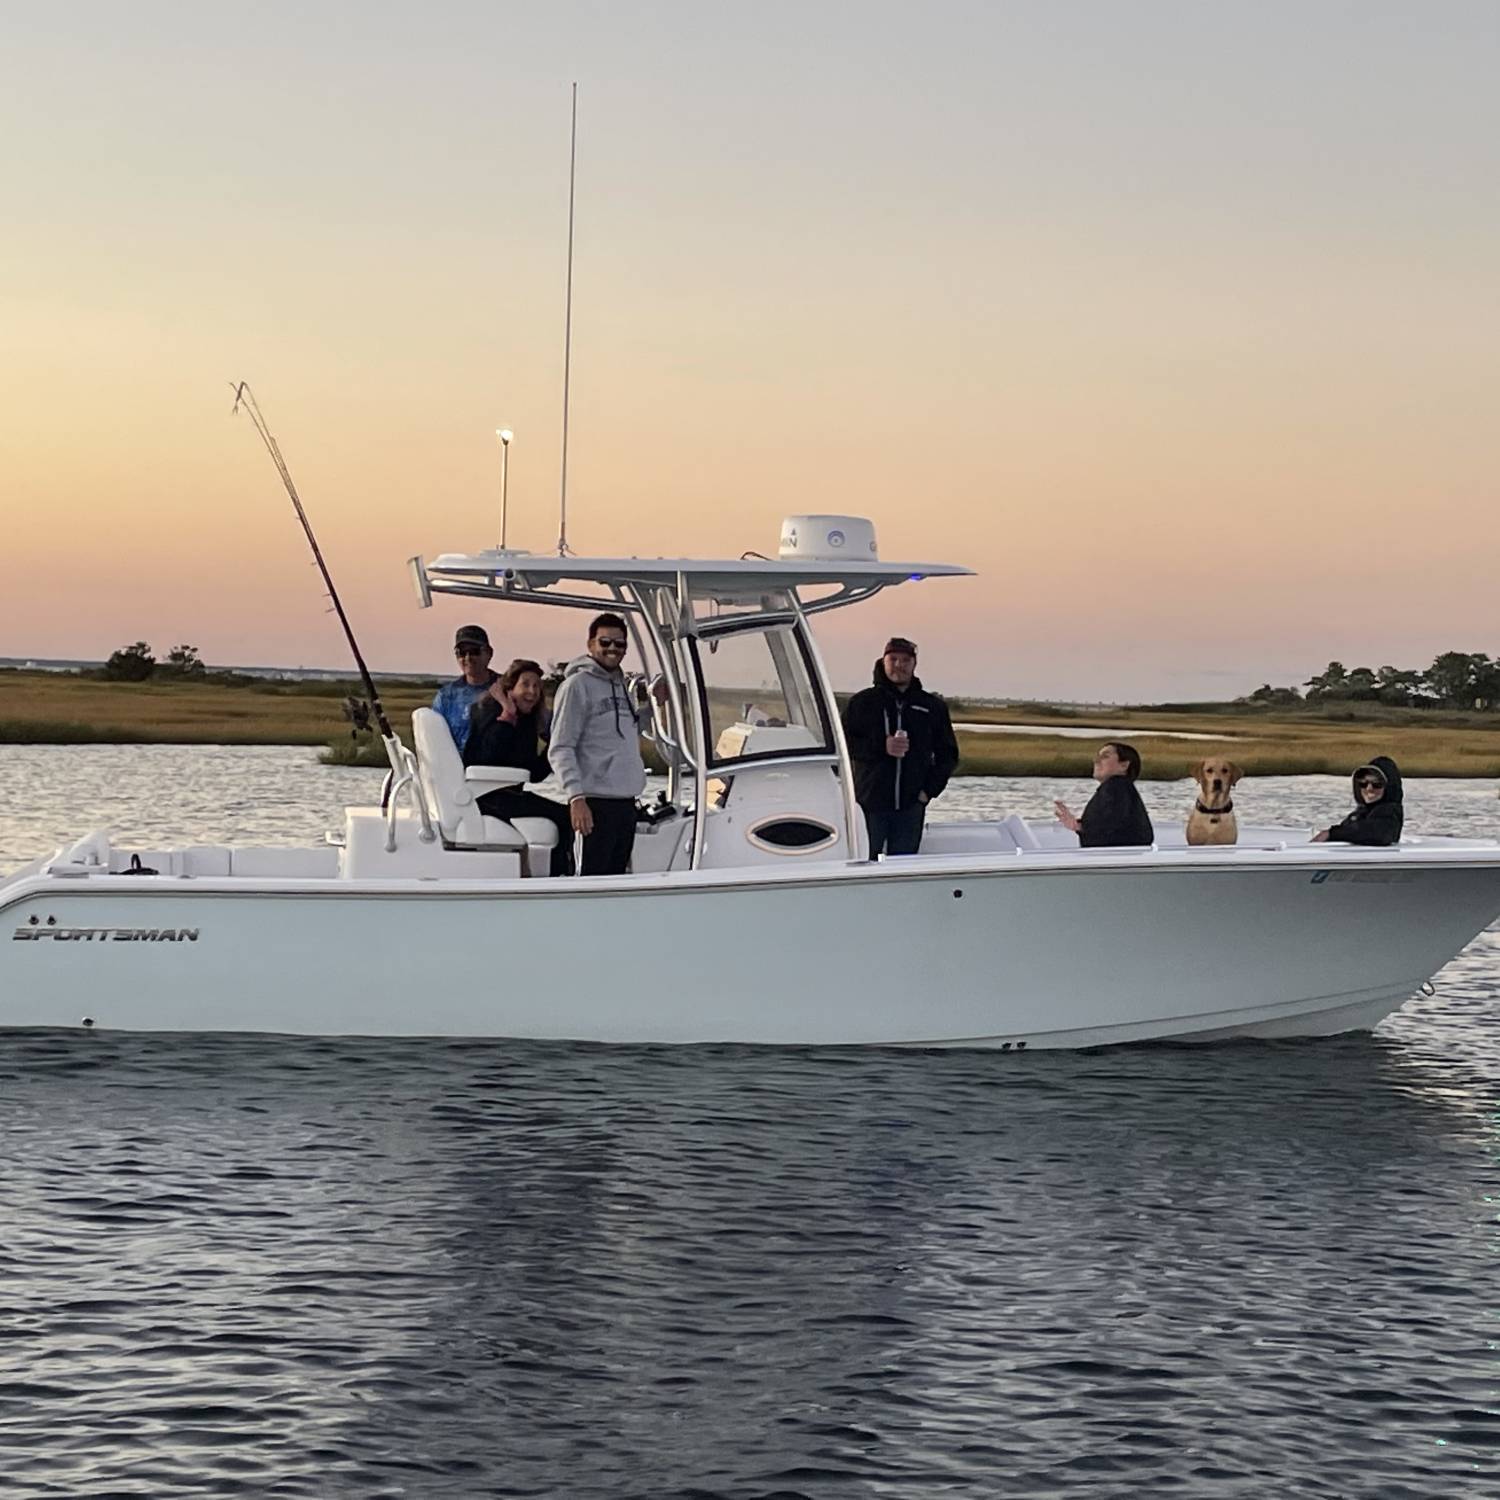 Title: Barnegat Bay Sunset Cruise - On board their Sportsman Open 282 Center Console - Location: Loveladies Harbor, NJ. Participating in the Photo Contest #SportsmanMarch